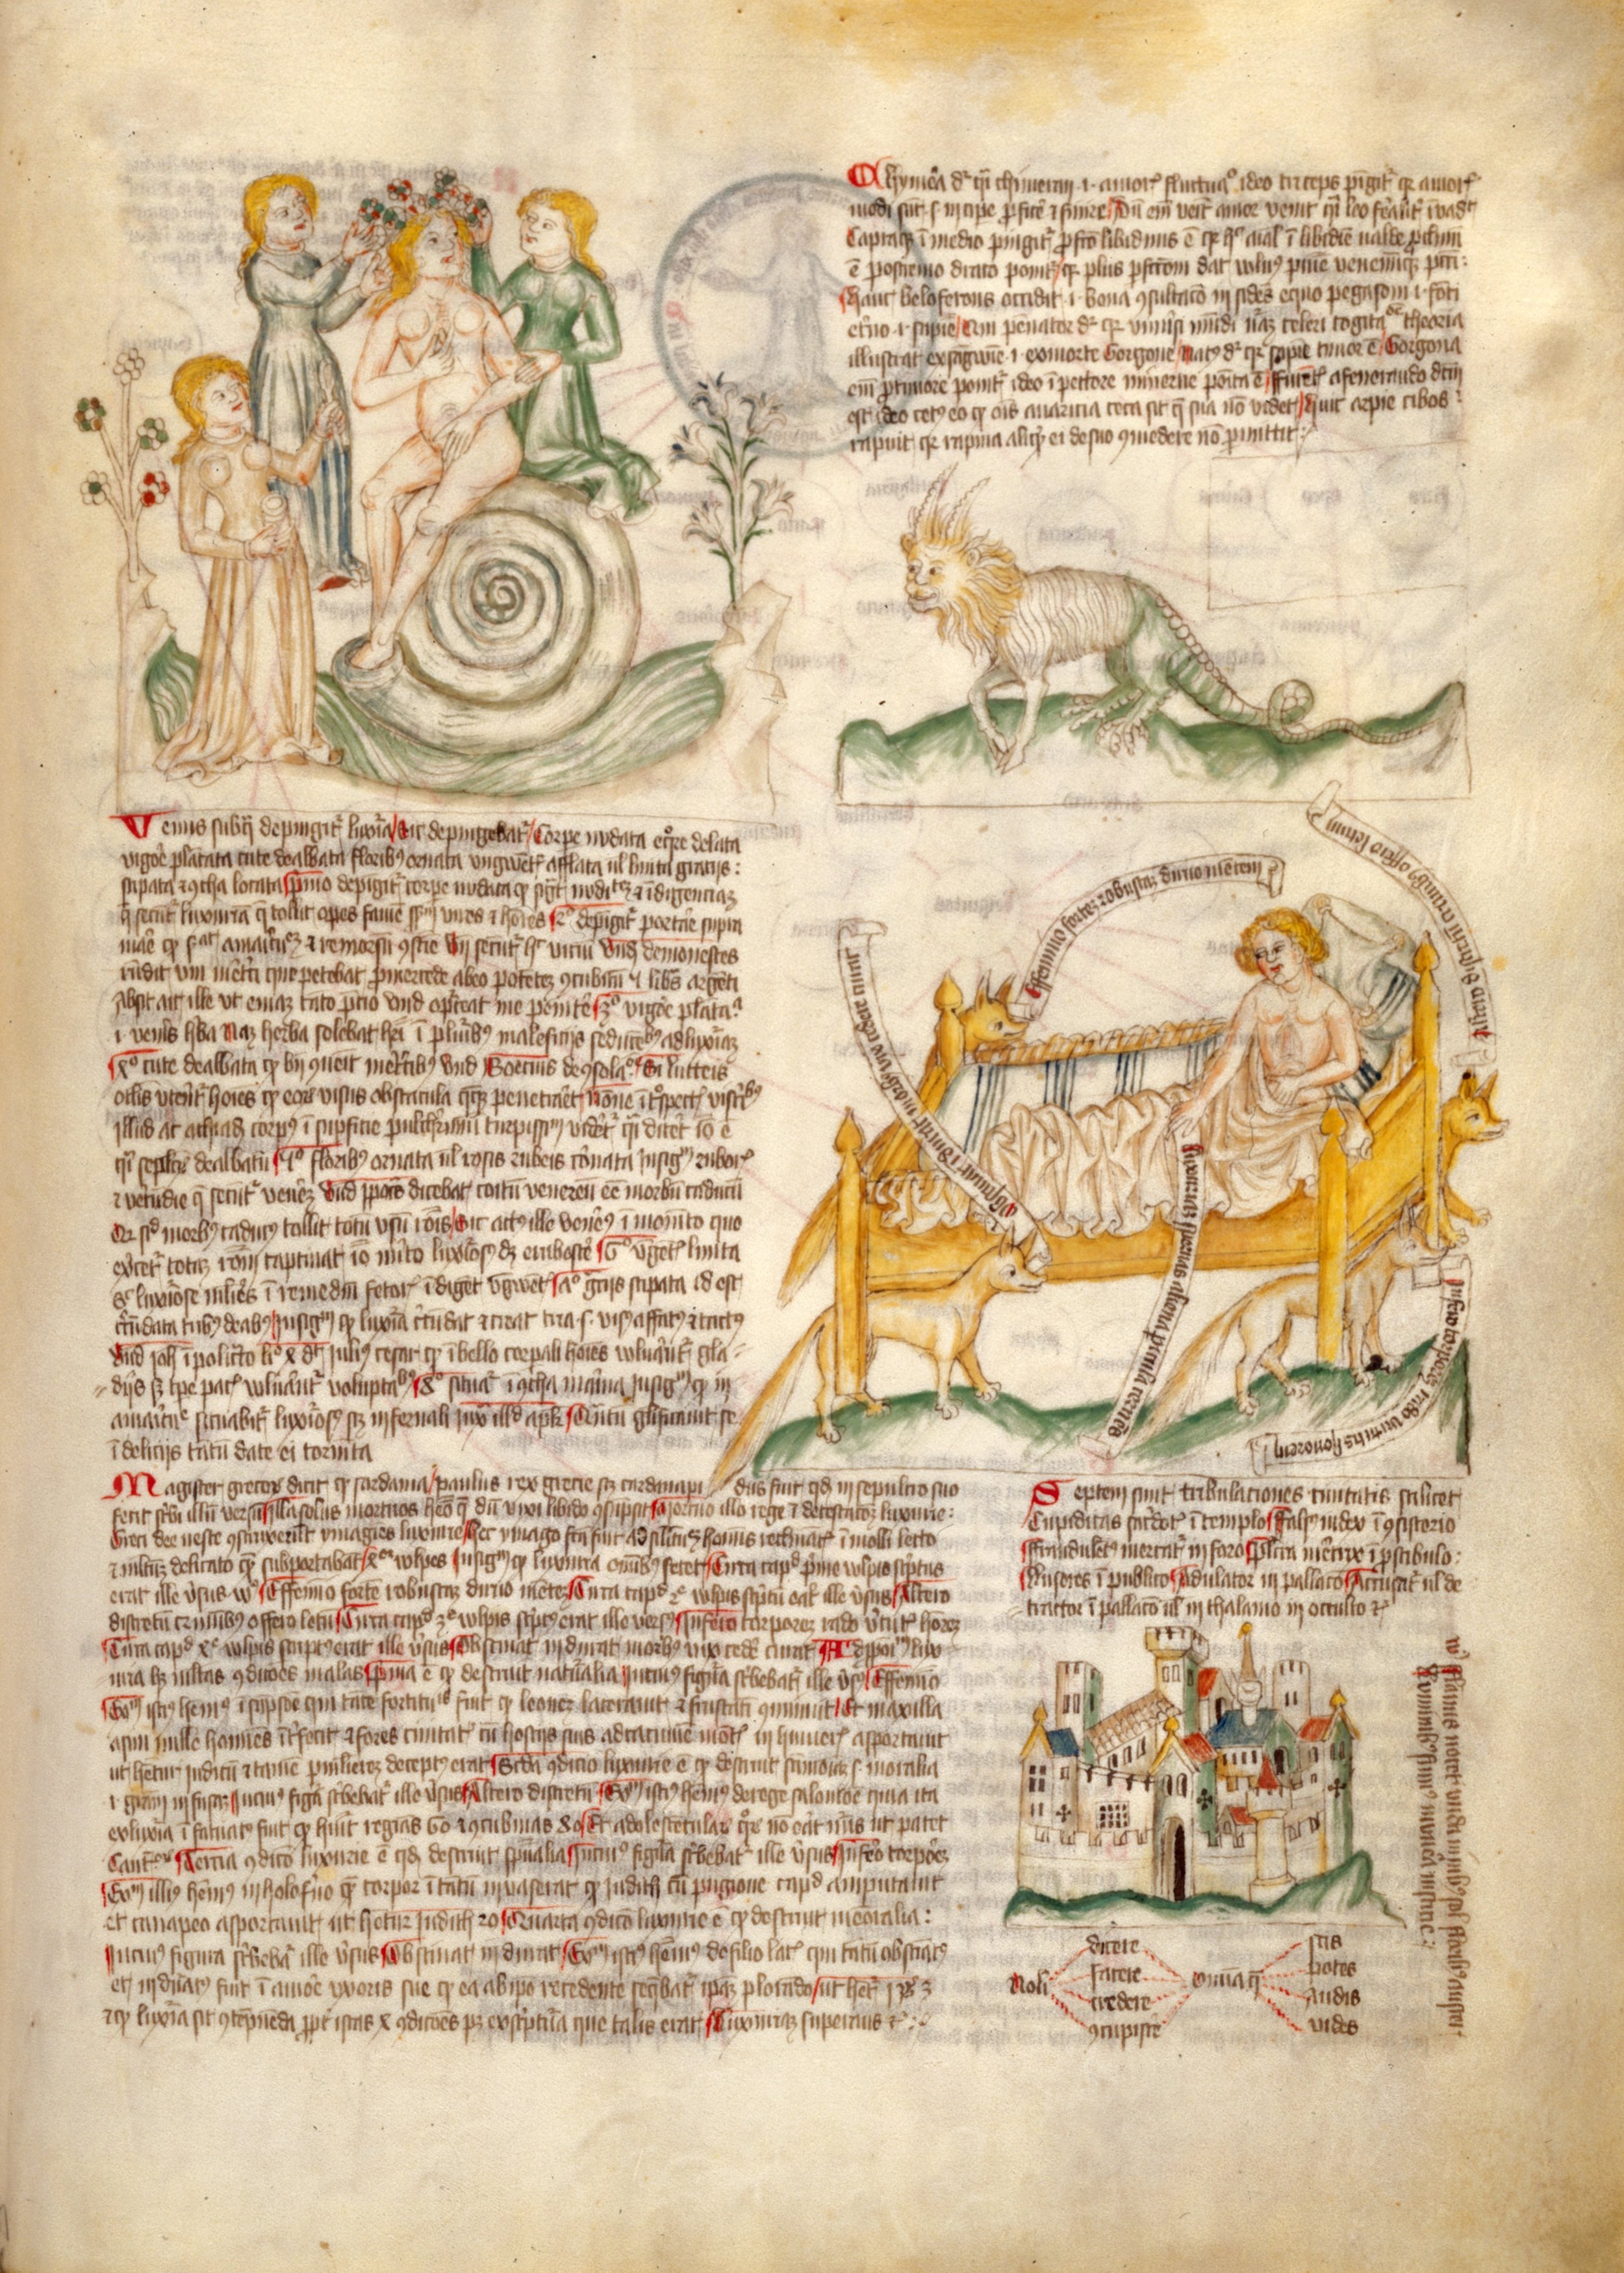 This page 
shows the personification of lechery